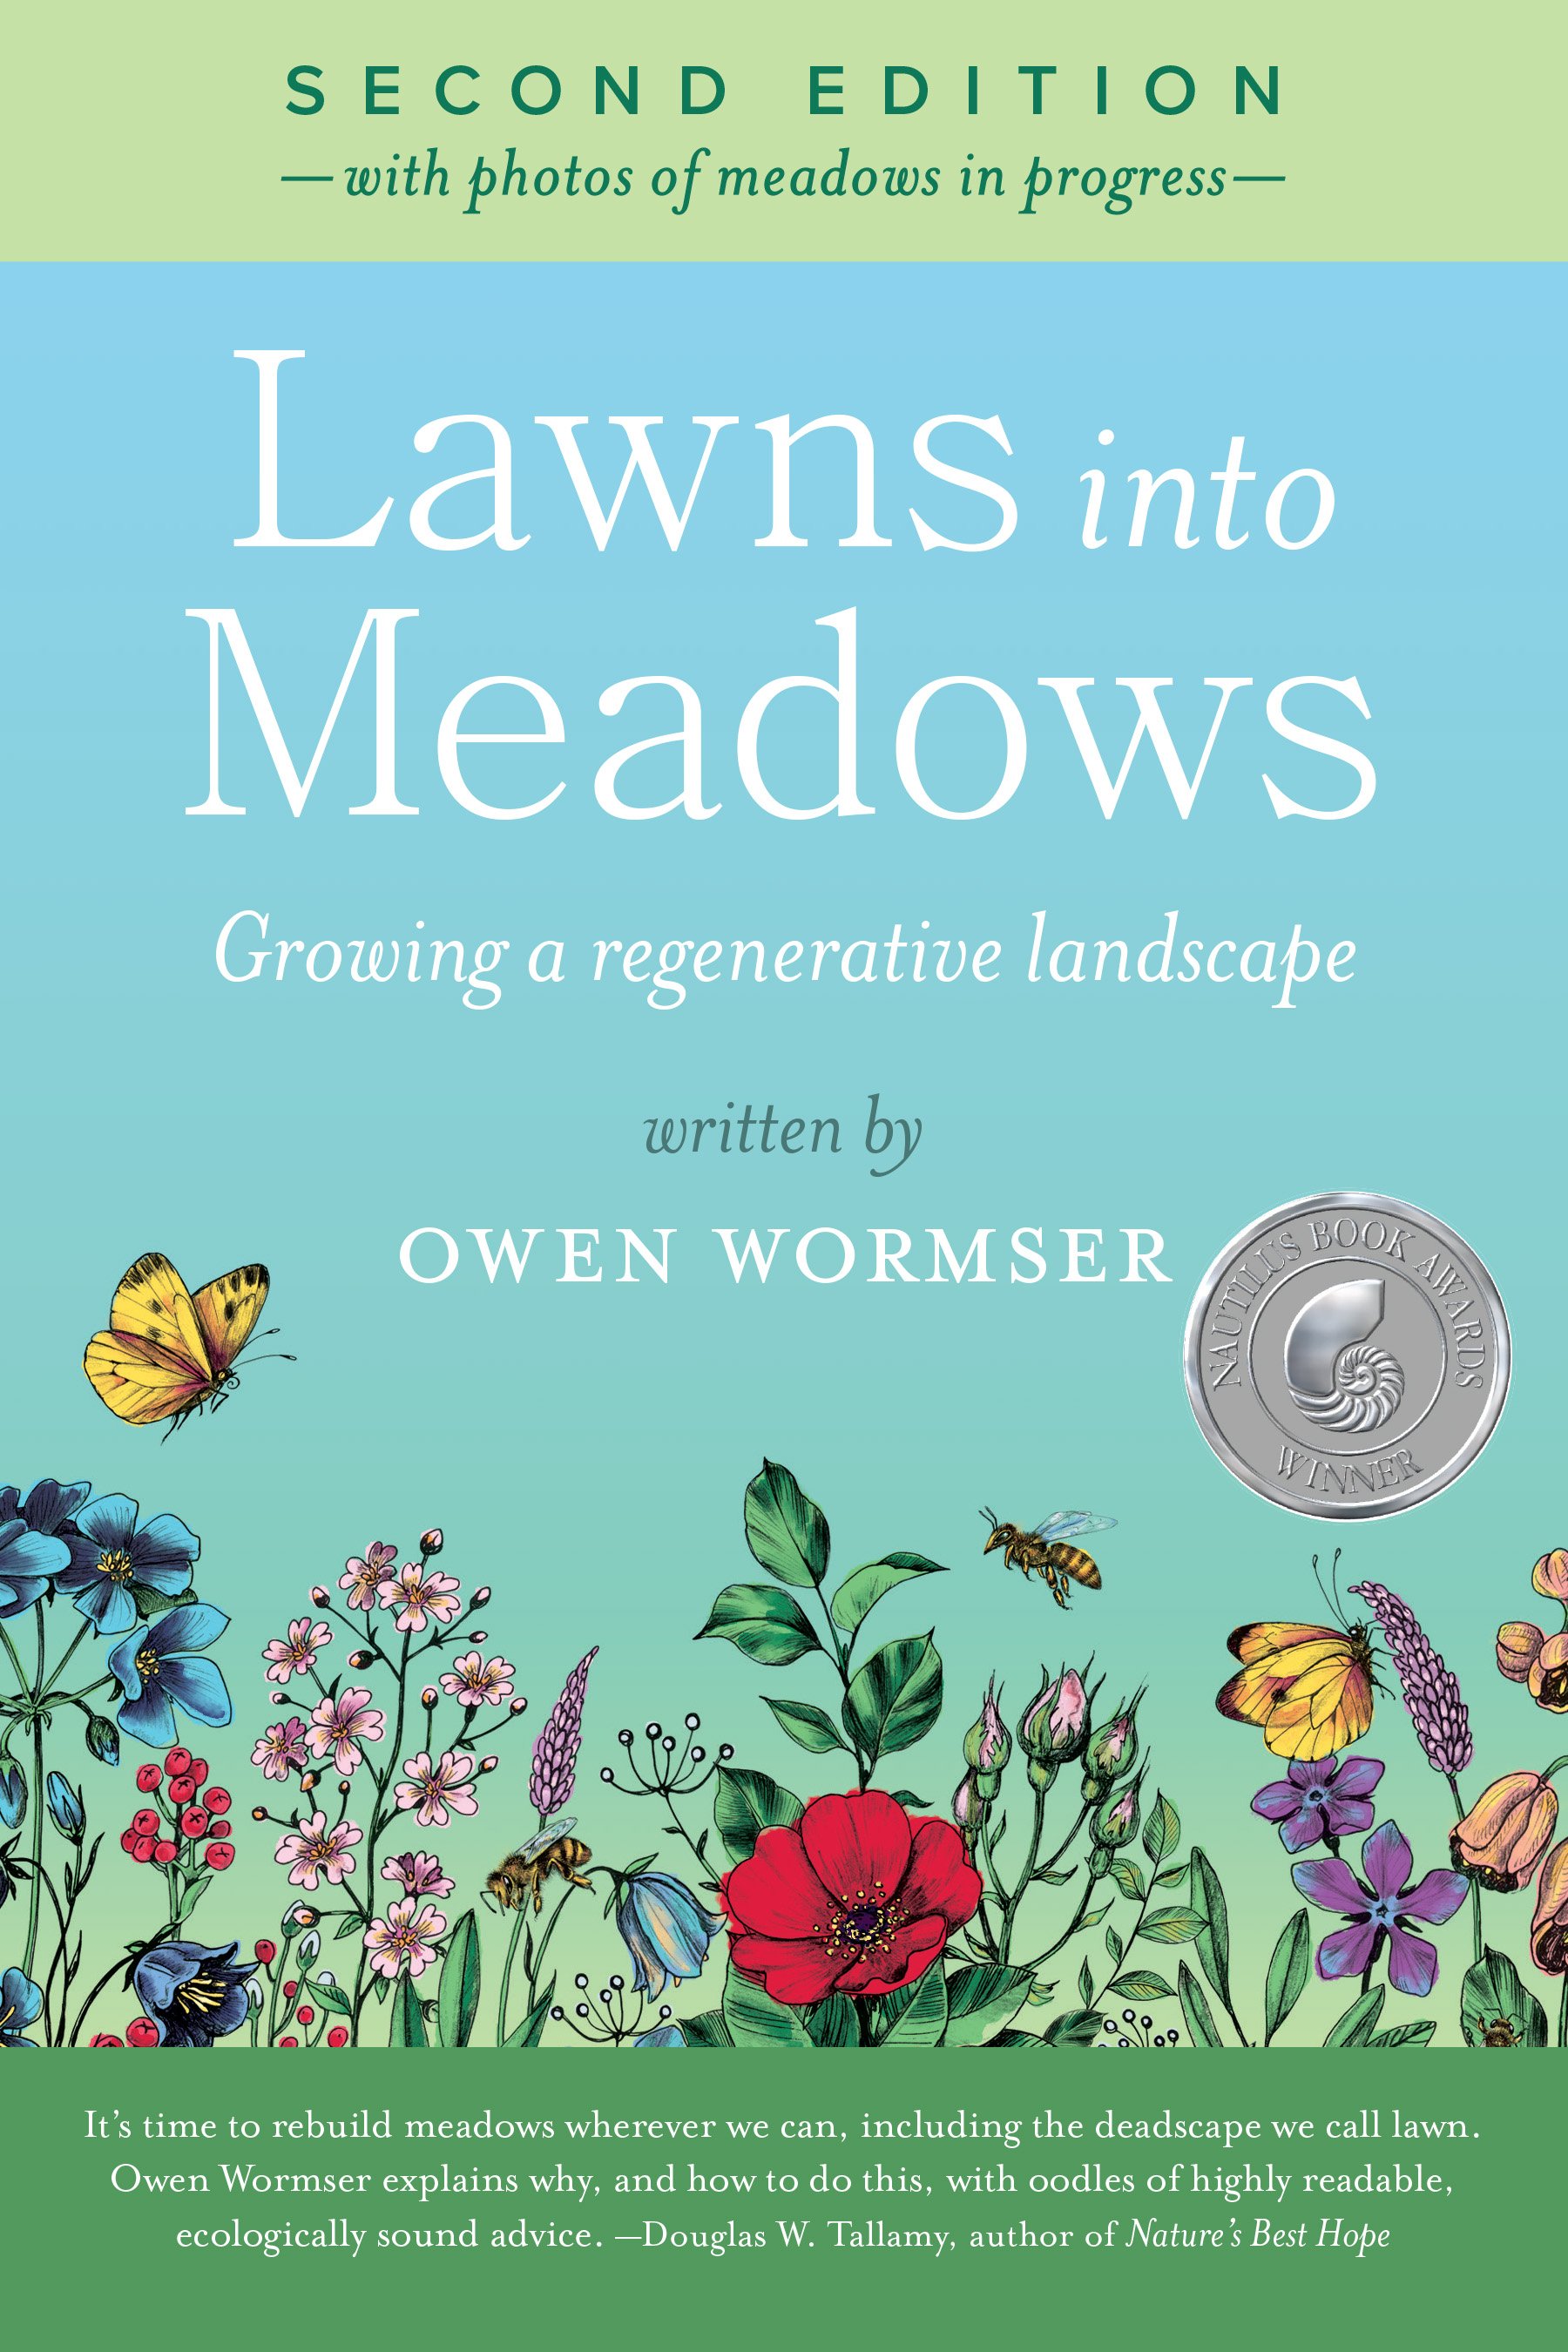 LawnstoMeadows_Cover072722.jpg